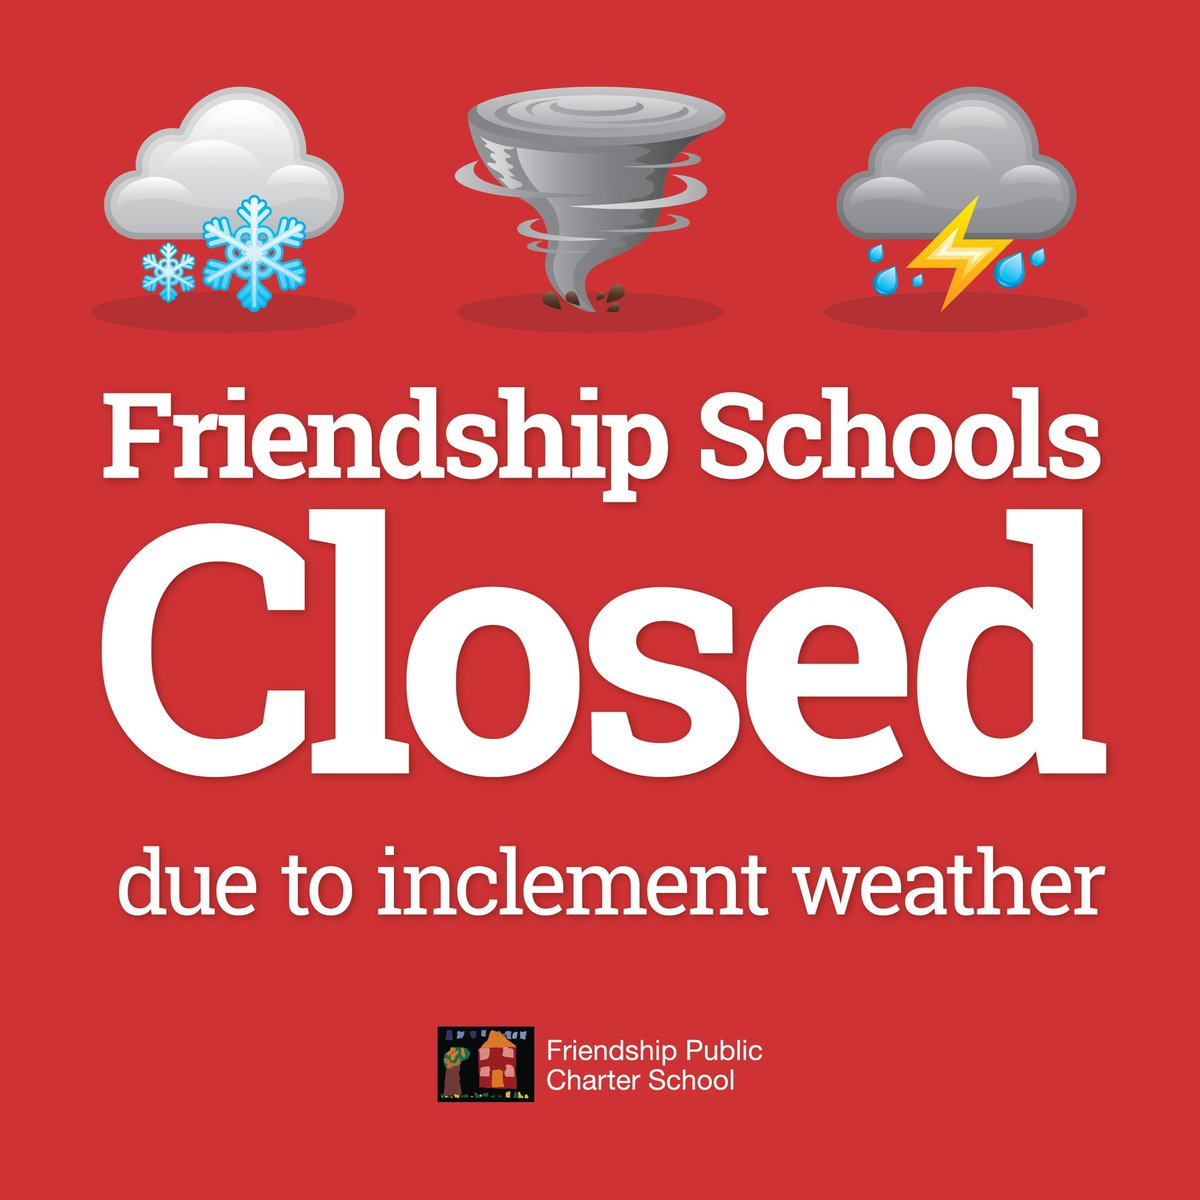 All Friendship Public Charter School campuses will be closed on Tuesday, January 16th. Please stay warm & be safe. #WeatherUpdate #SafetyFirst #FriendshipProud #dccharterproud